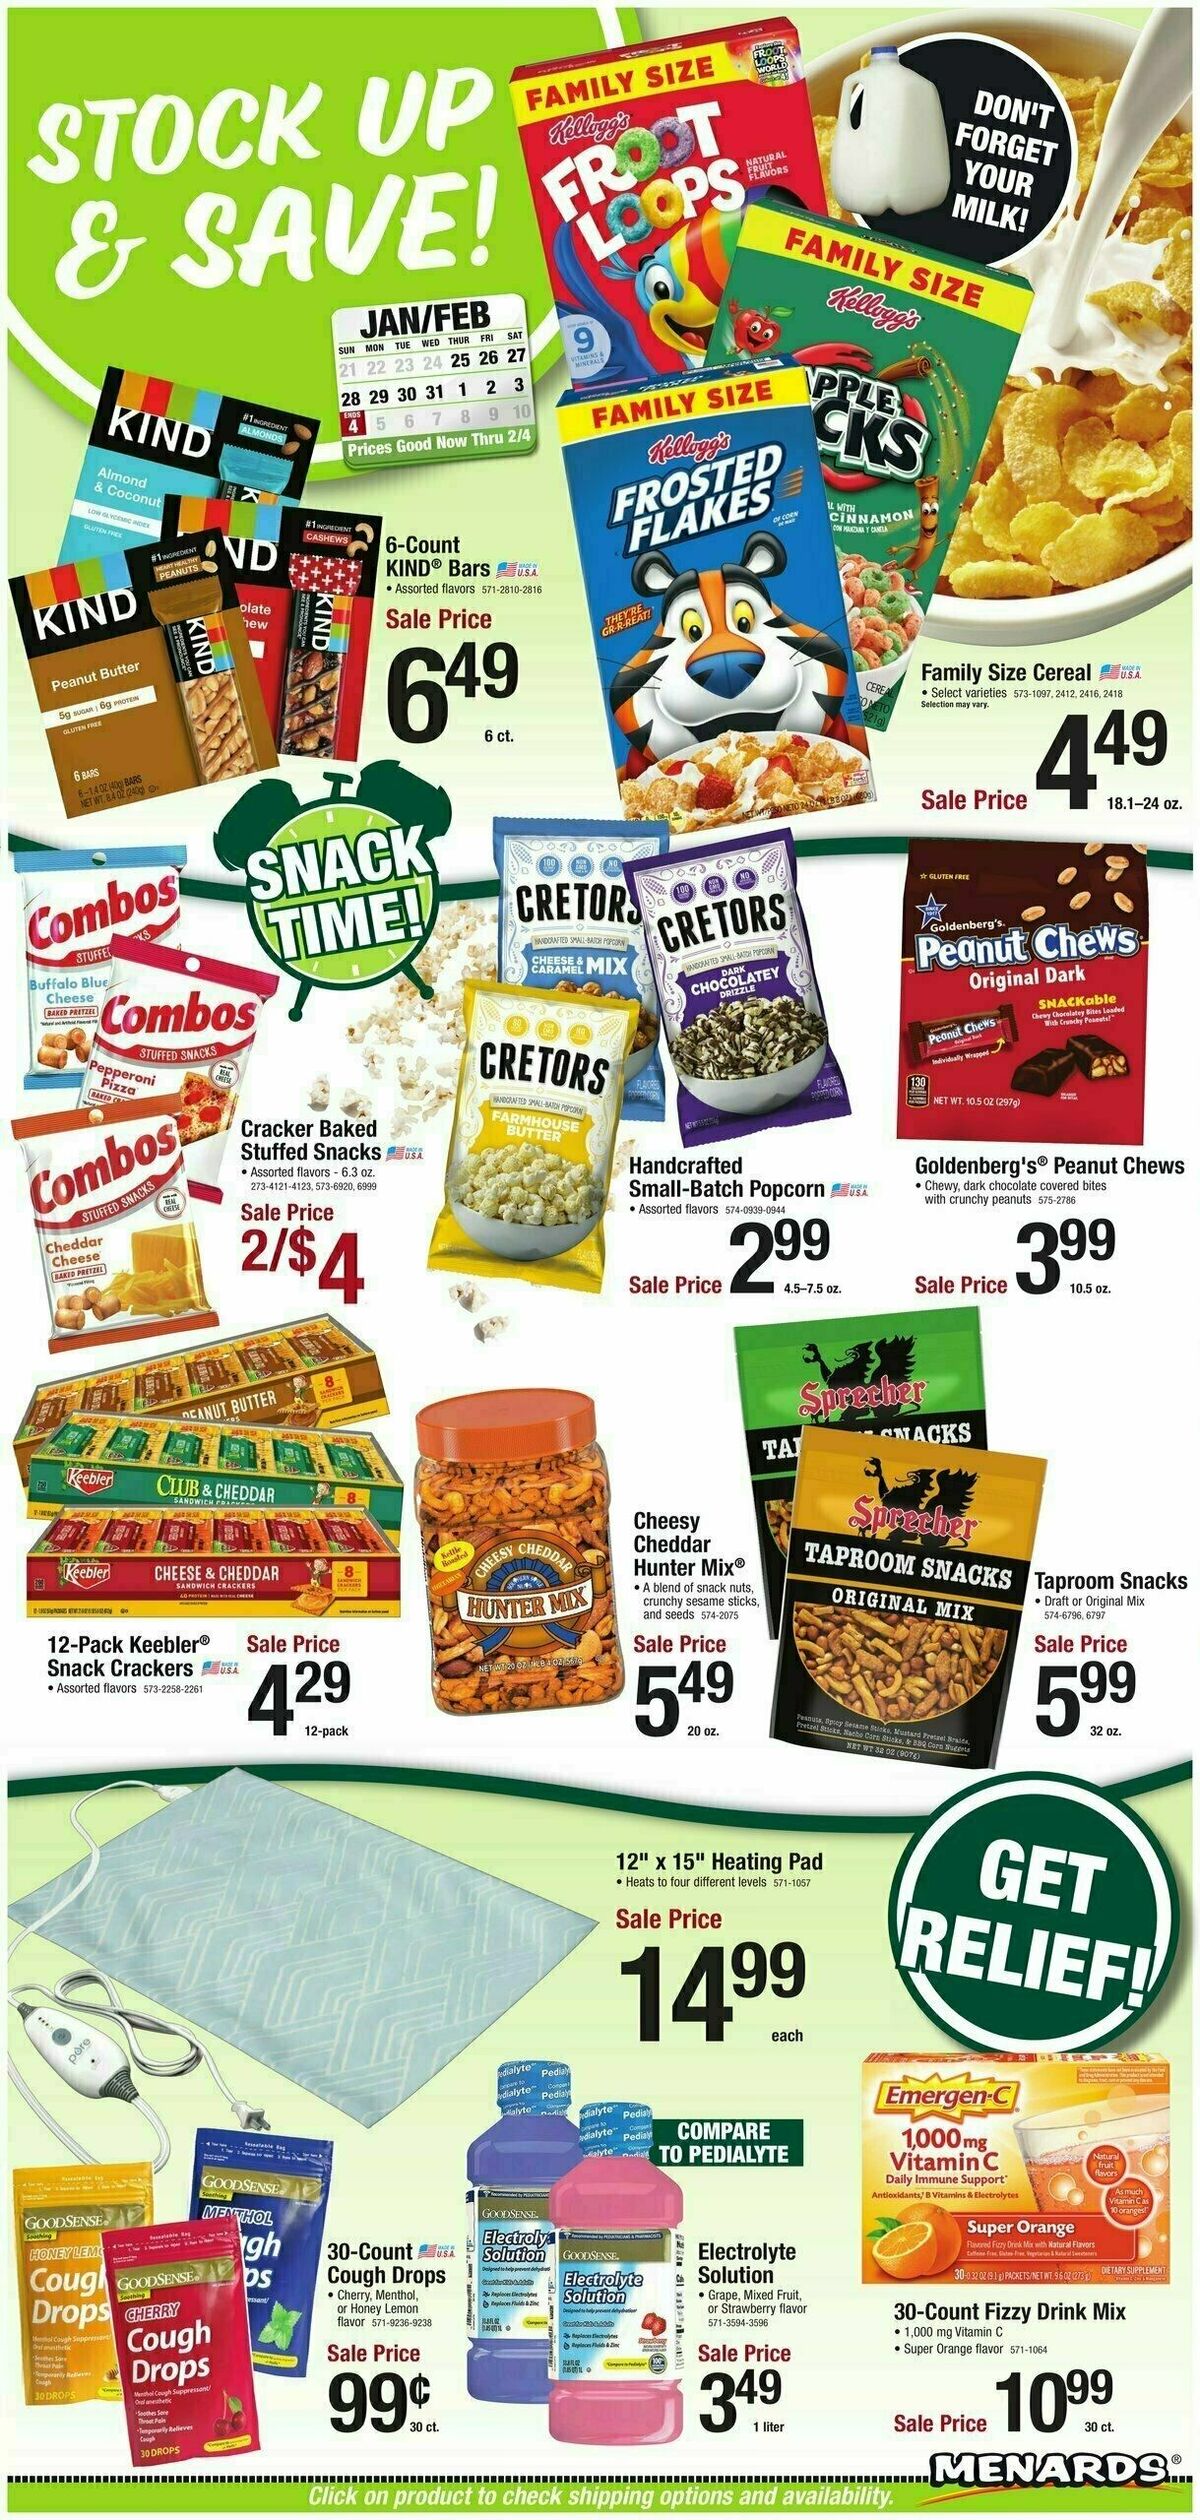 Menards Home Essentials Weekly Ad from January 24